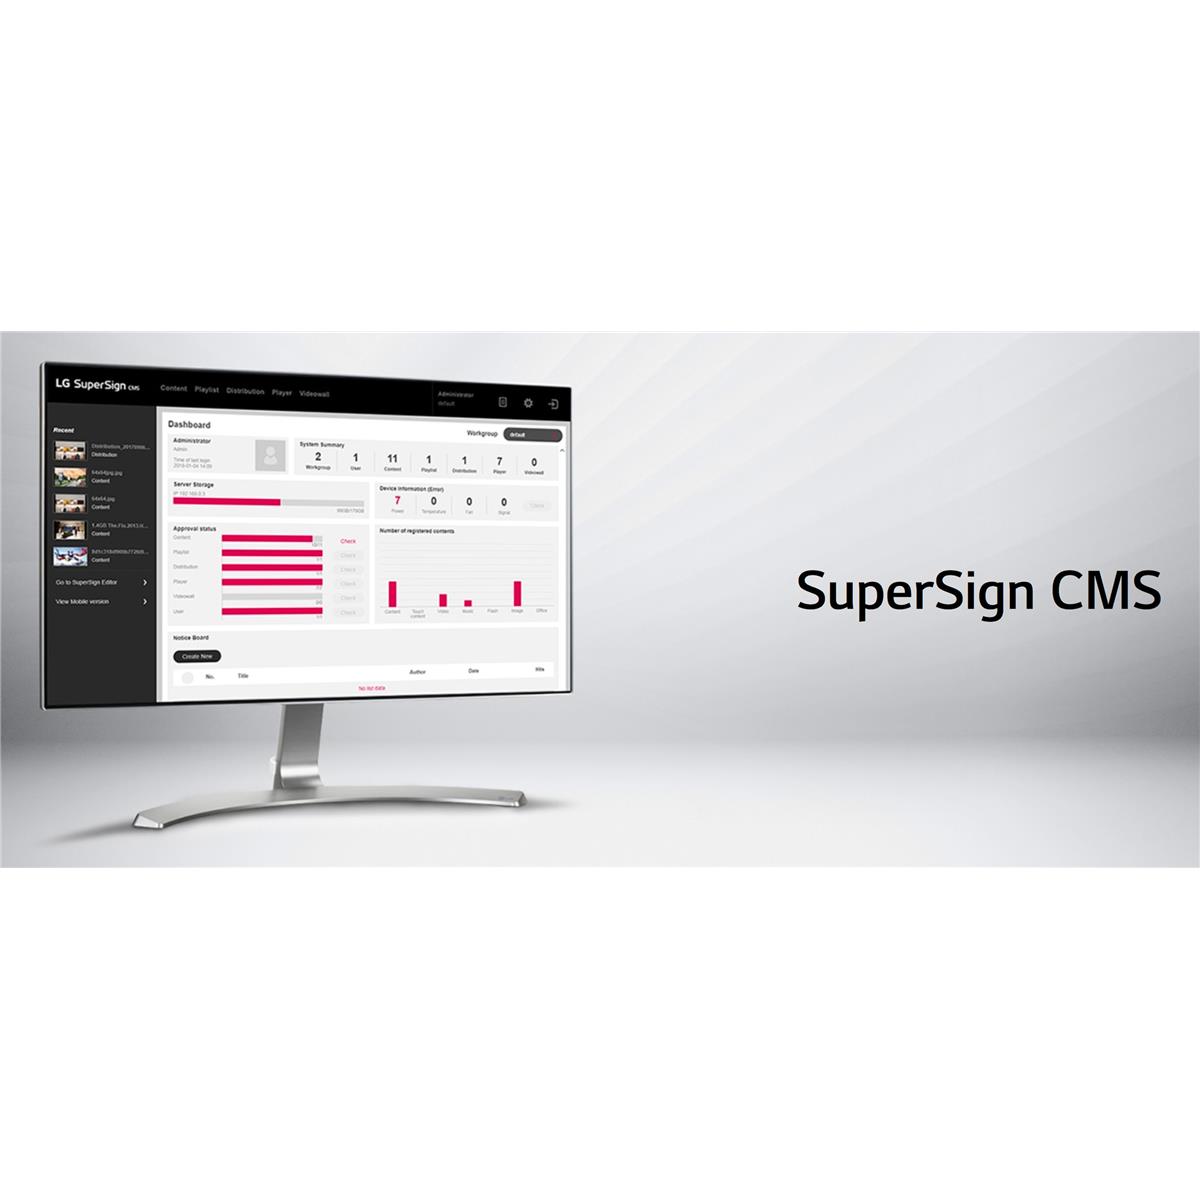 Image of LG SuperSign CMS 3-Year Solution Renewal